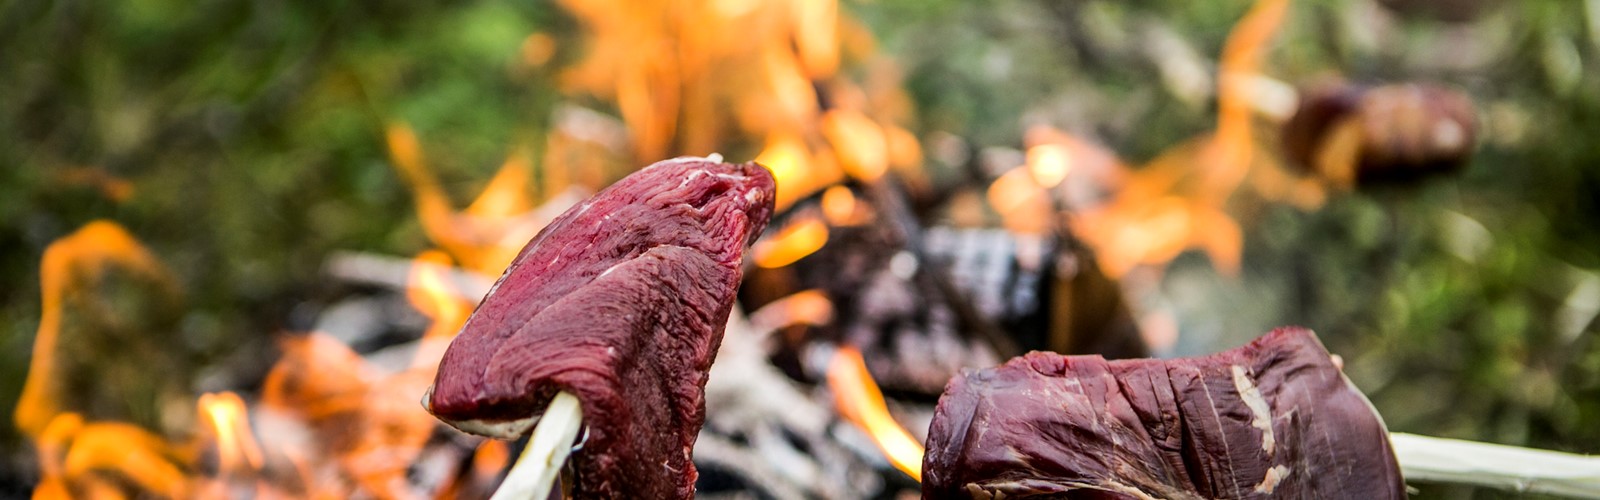 REINDEER MEAT COOKED ON CAMPFIRE FINNMARK NORWAY PHOTO CHRISTIAN ROTH CHRISTENSEN 5848258 Foto Christian Roth Christensen